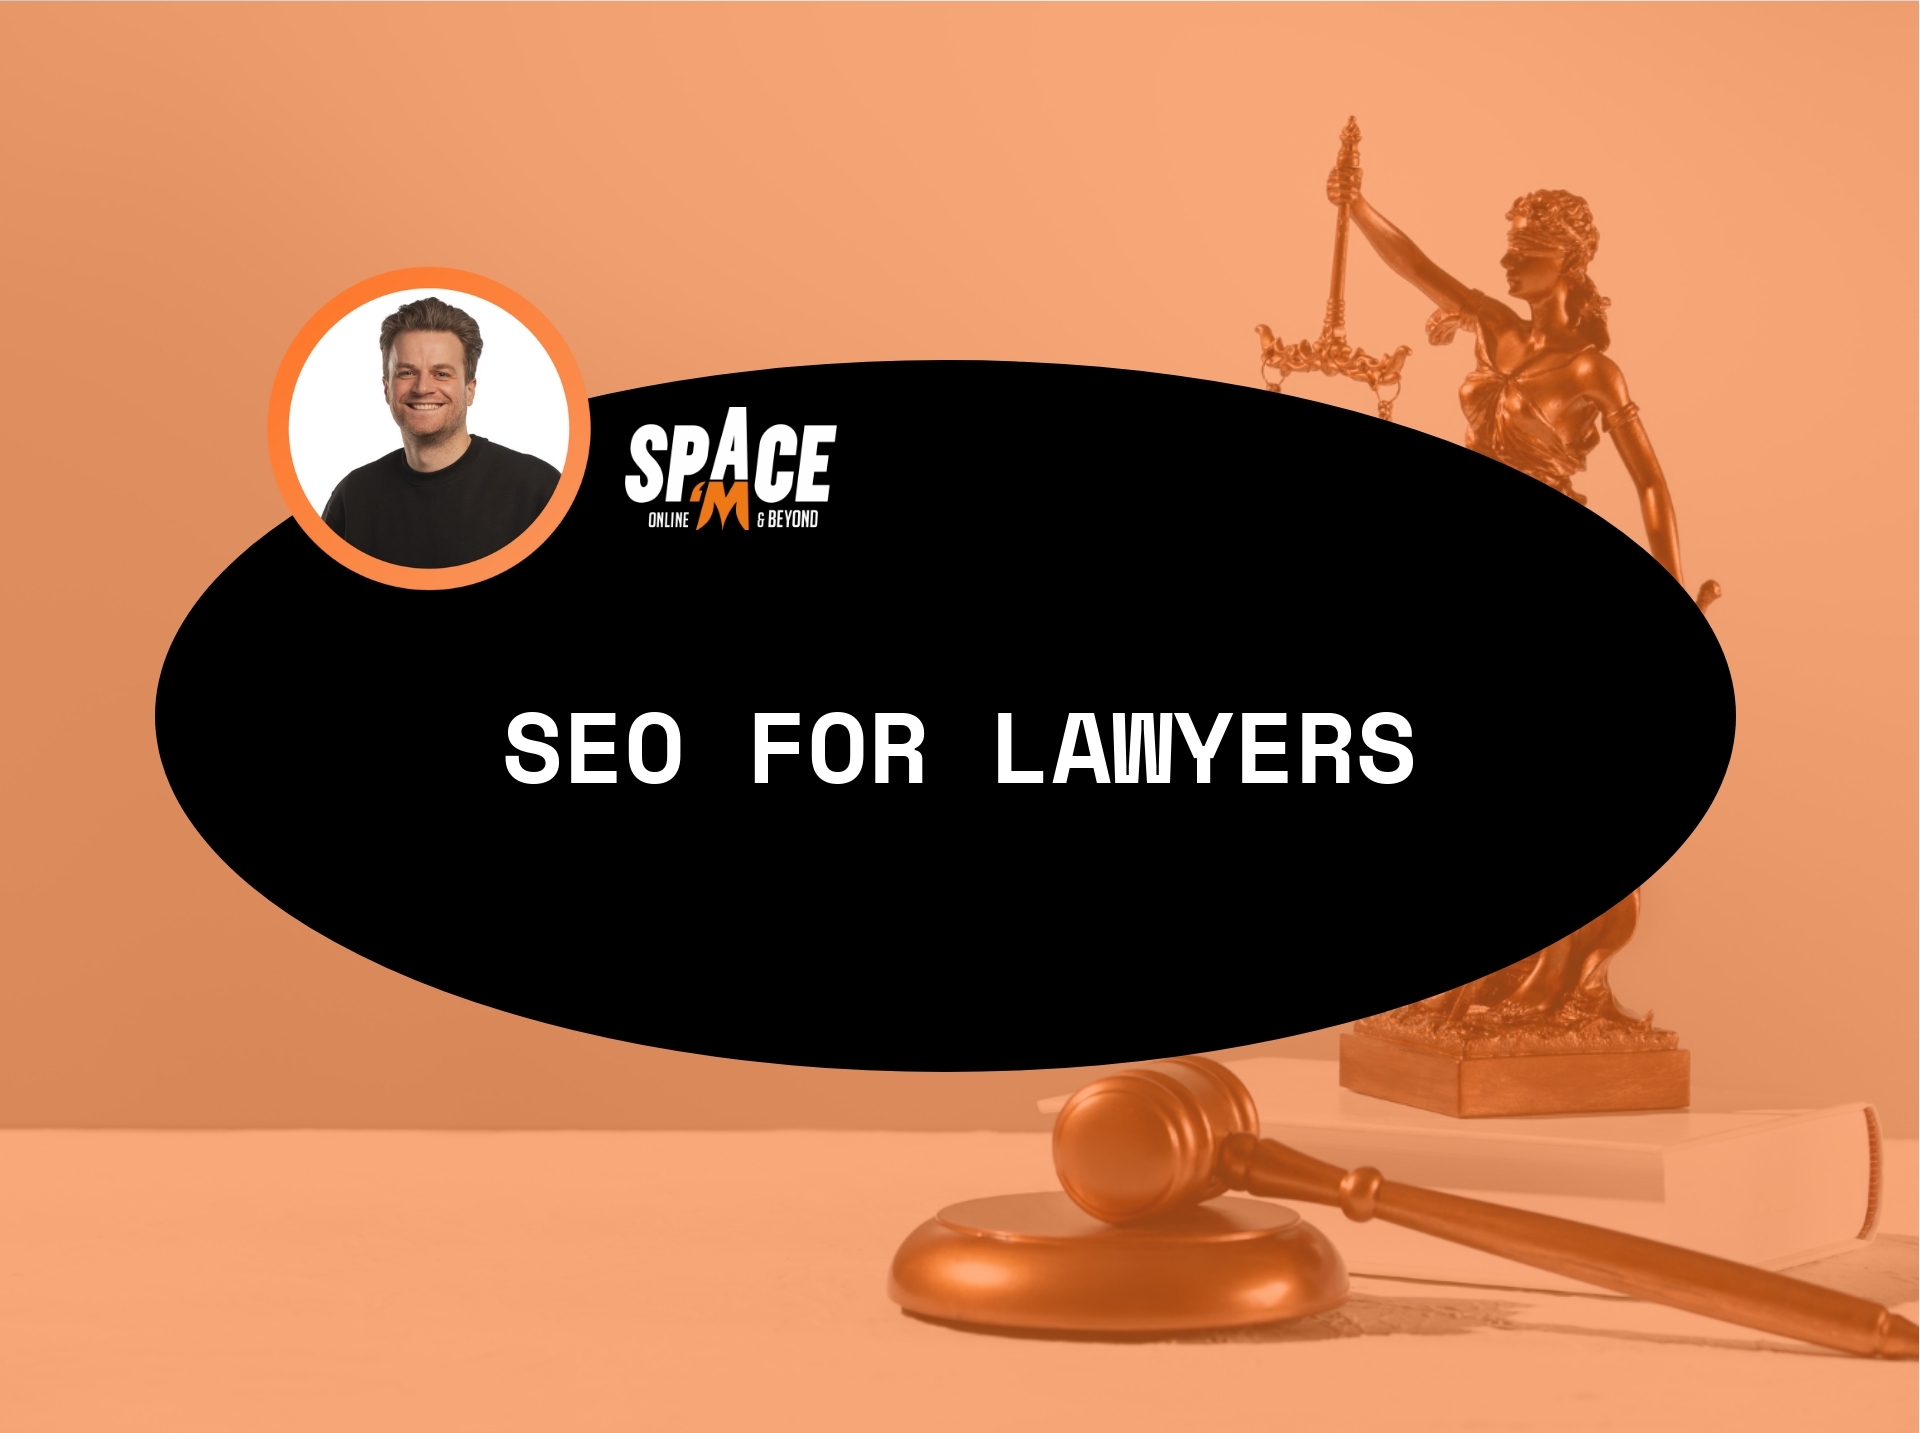 seo for lawyers